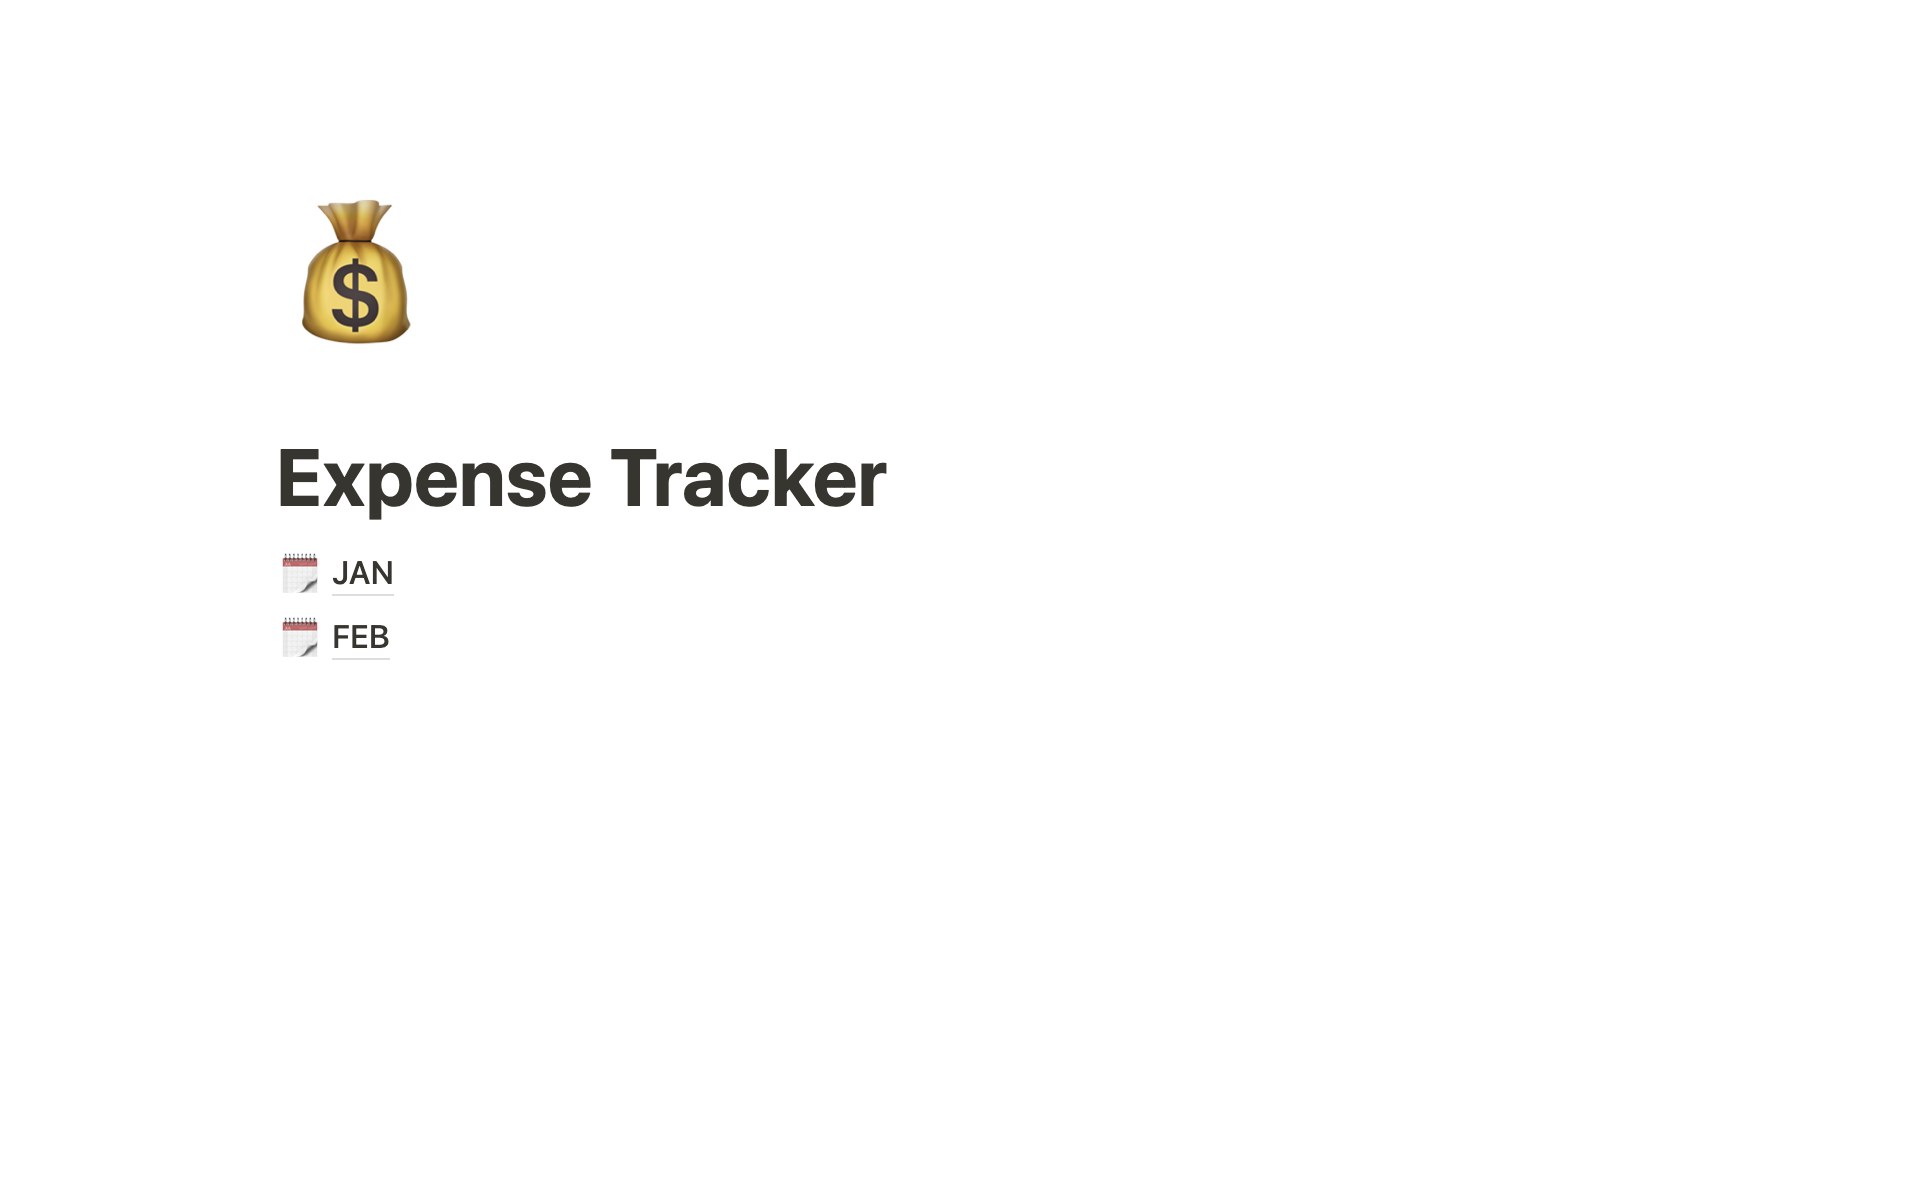 A personalized notion template to track their expenses, focused primarily on students, but could be useful to all.